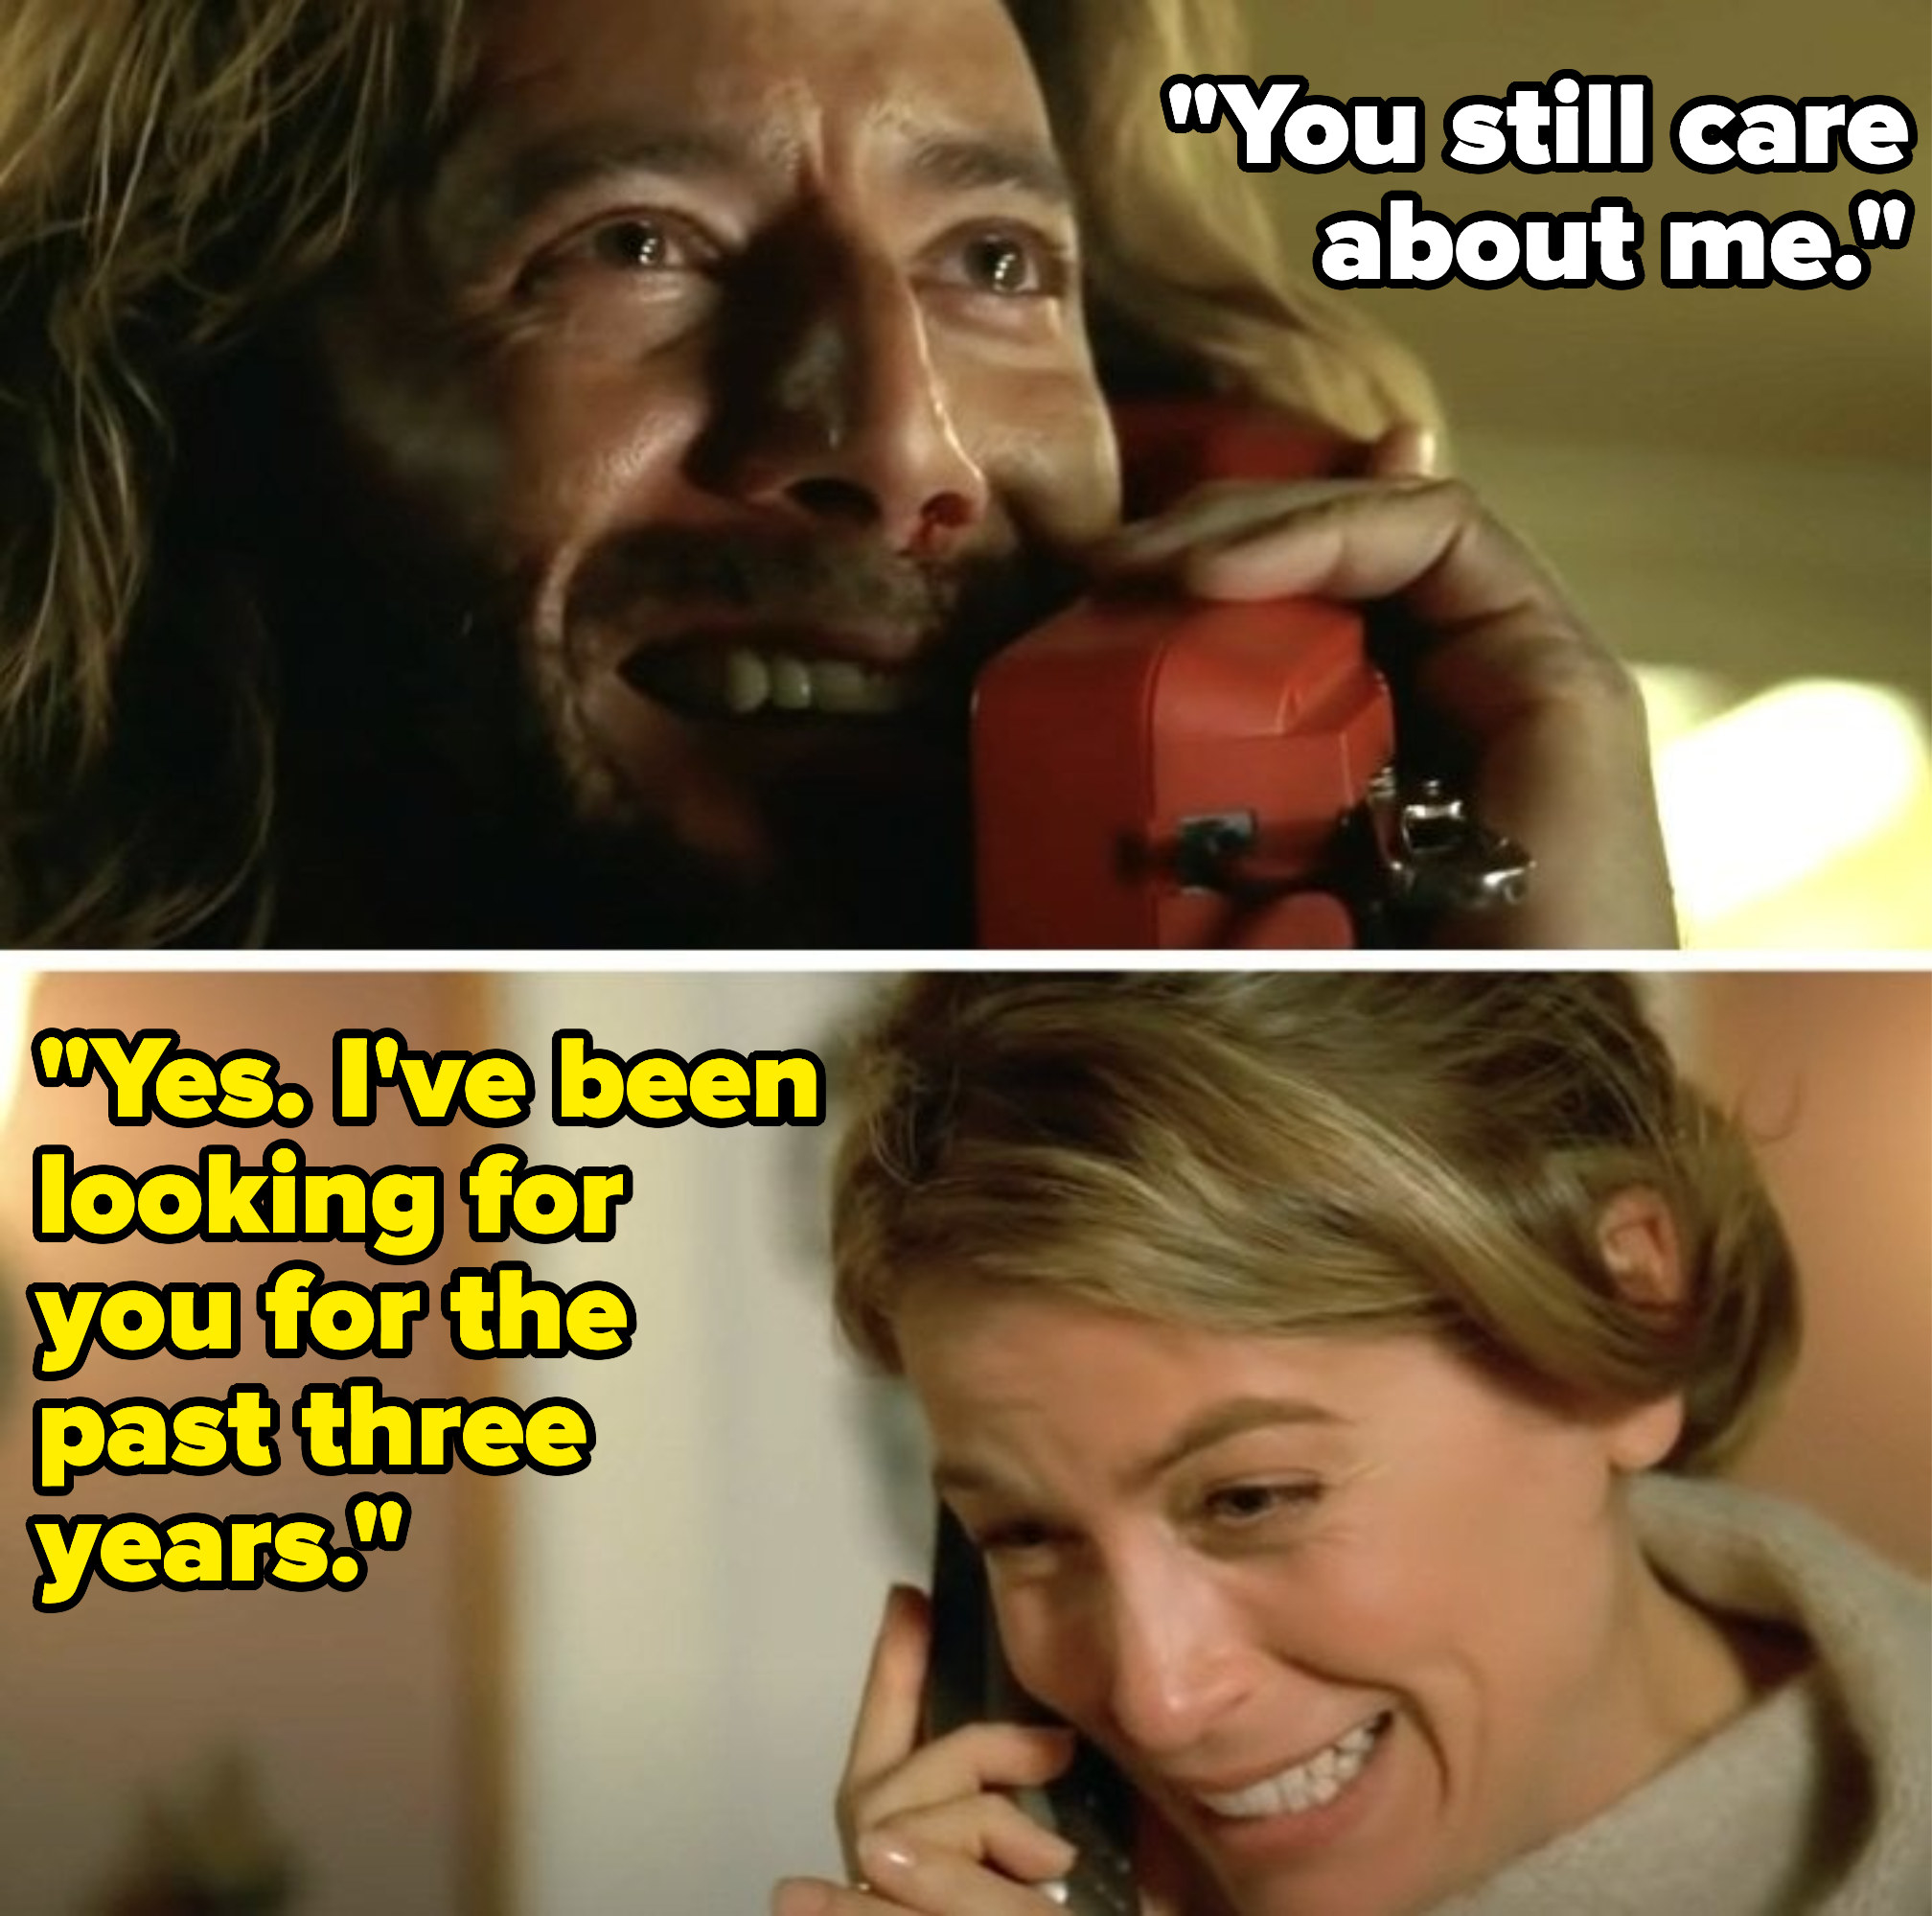 Desmond and Penny are emotional on the phone with each other